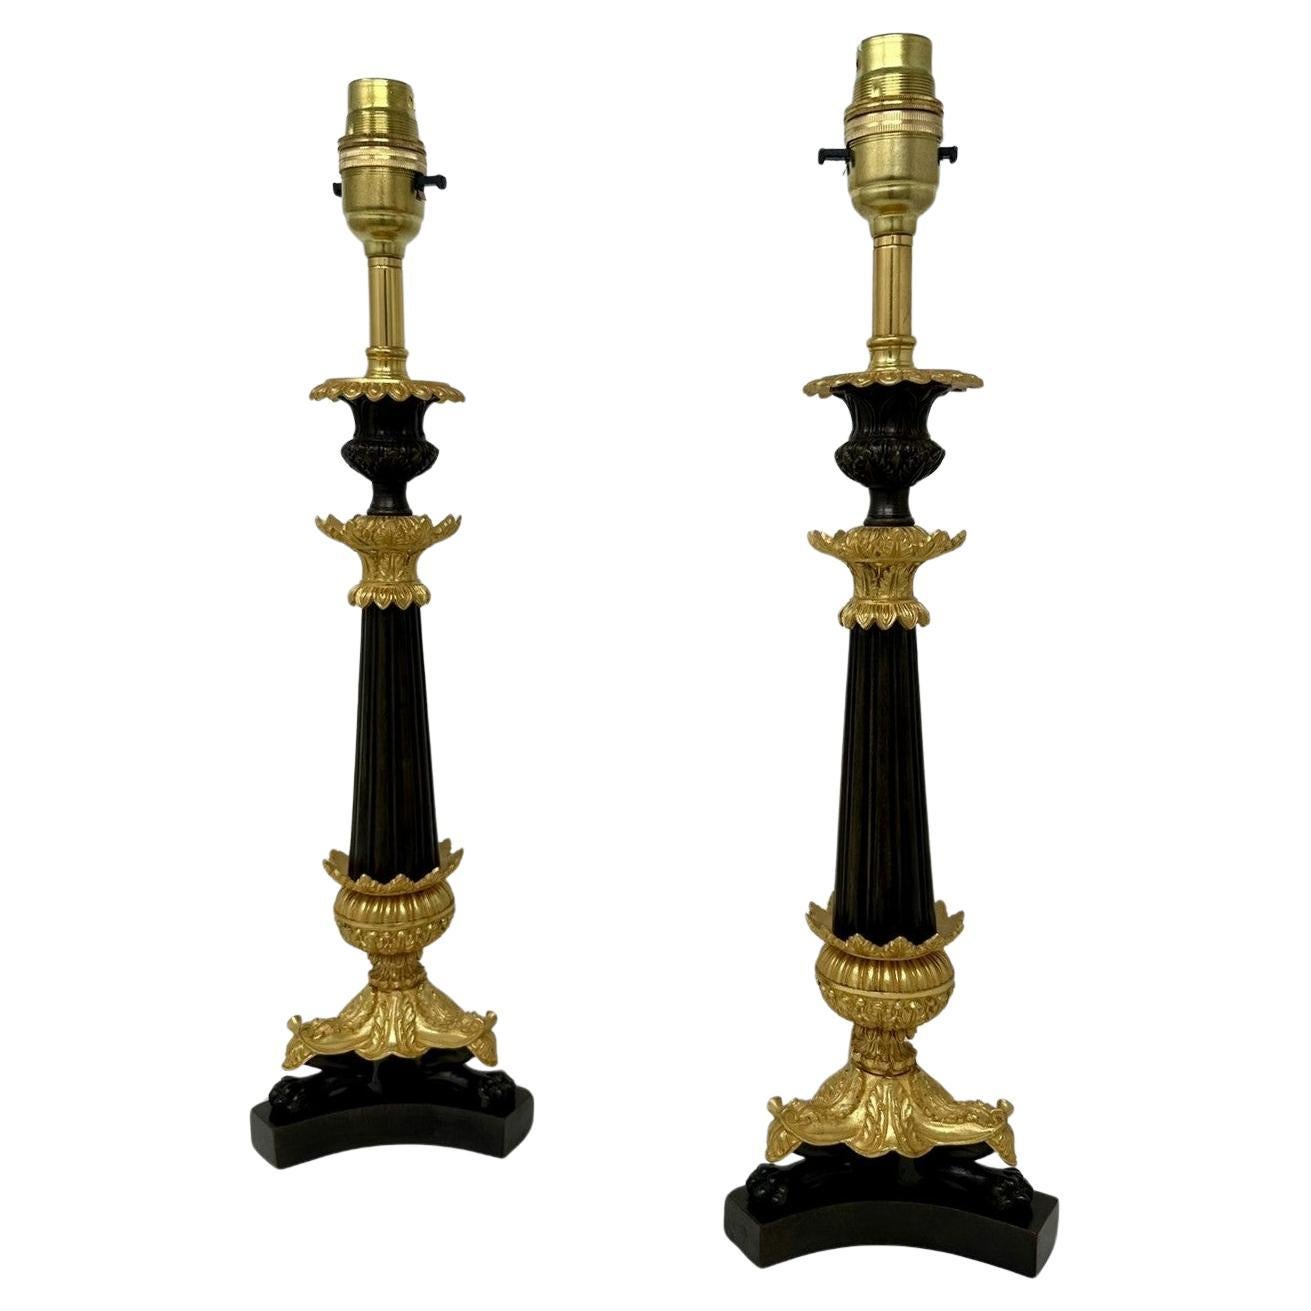 Antique Pair French Doré Bronze Neoclassical Ormolu Gilt Candlestick Table Lamps For Sale